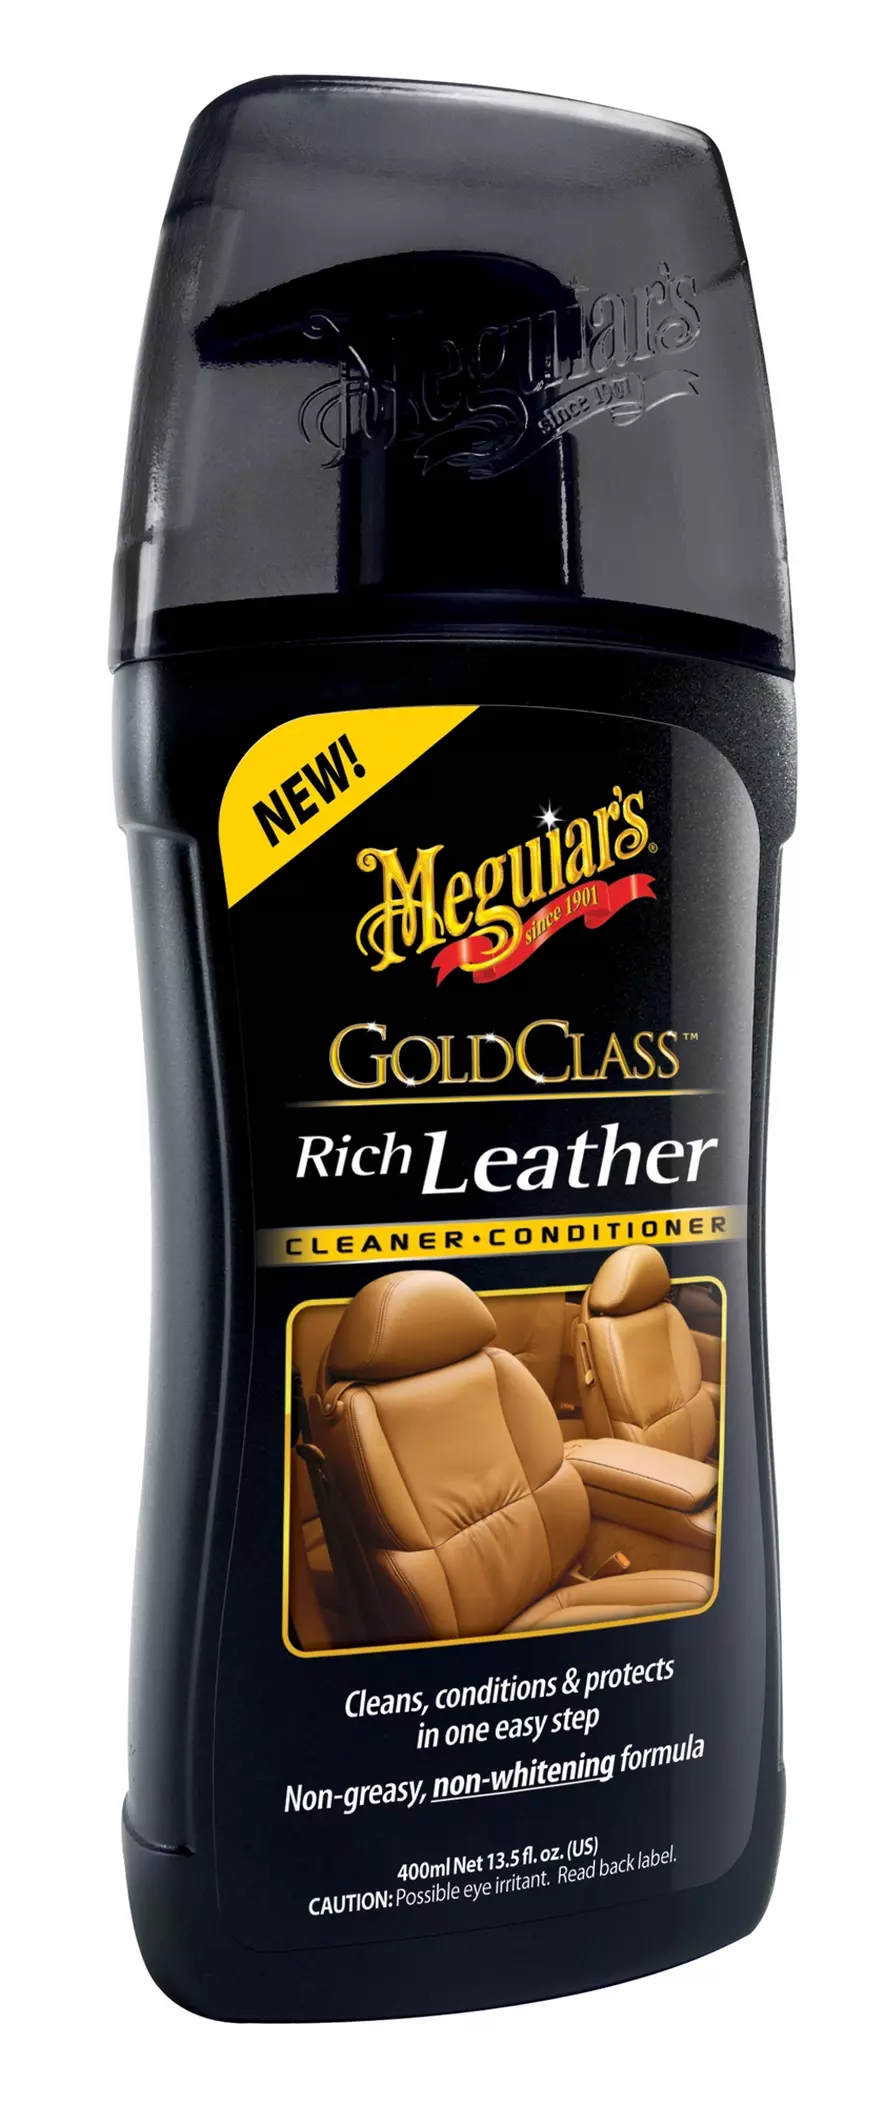 Meguiars Gold Class Rich Leather Cleaner/Conditioner, 400 ml